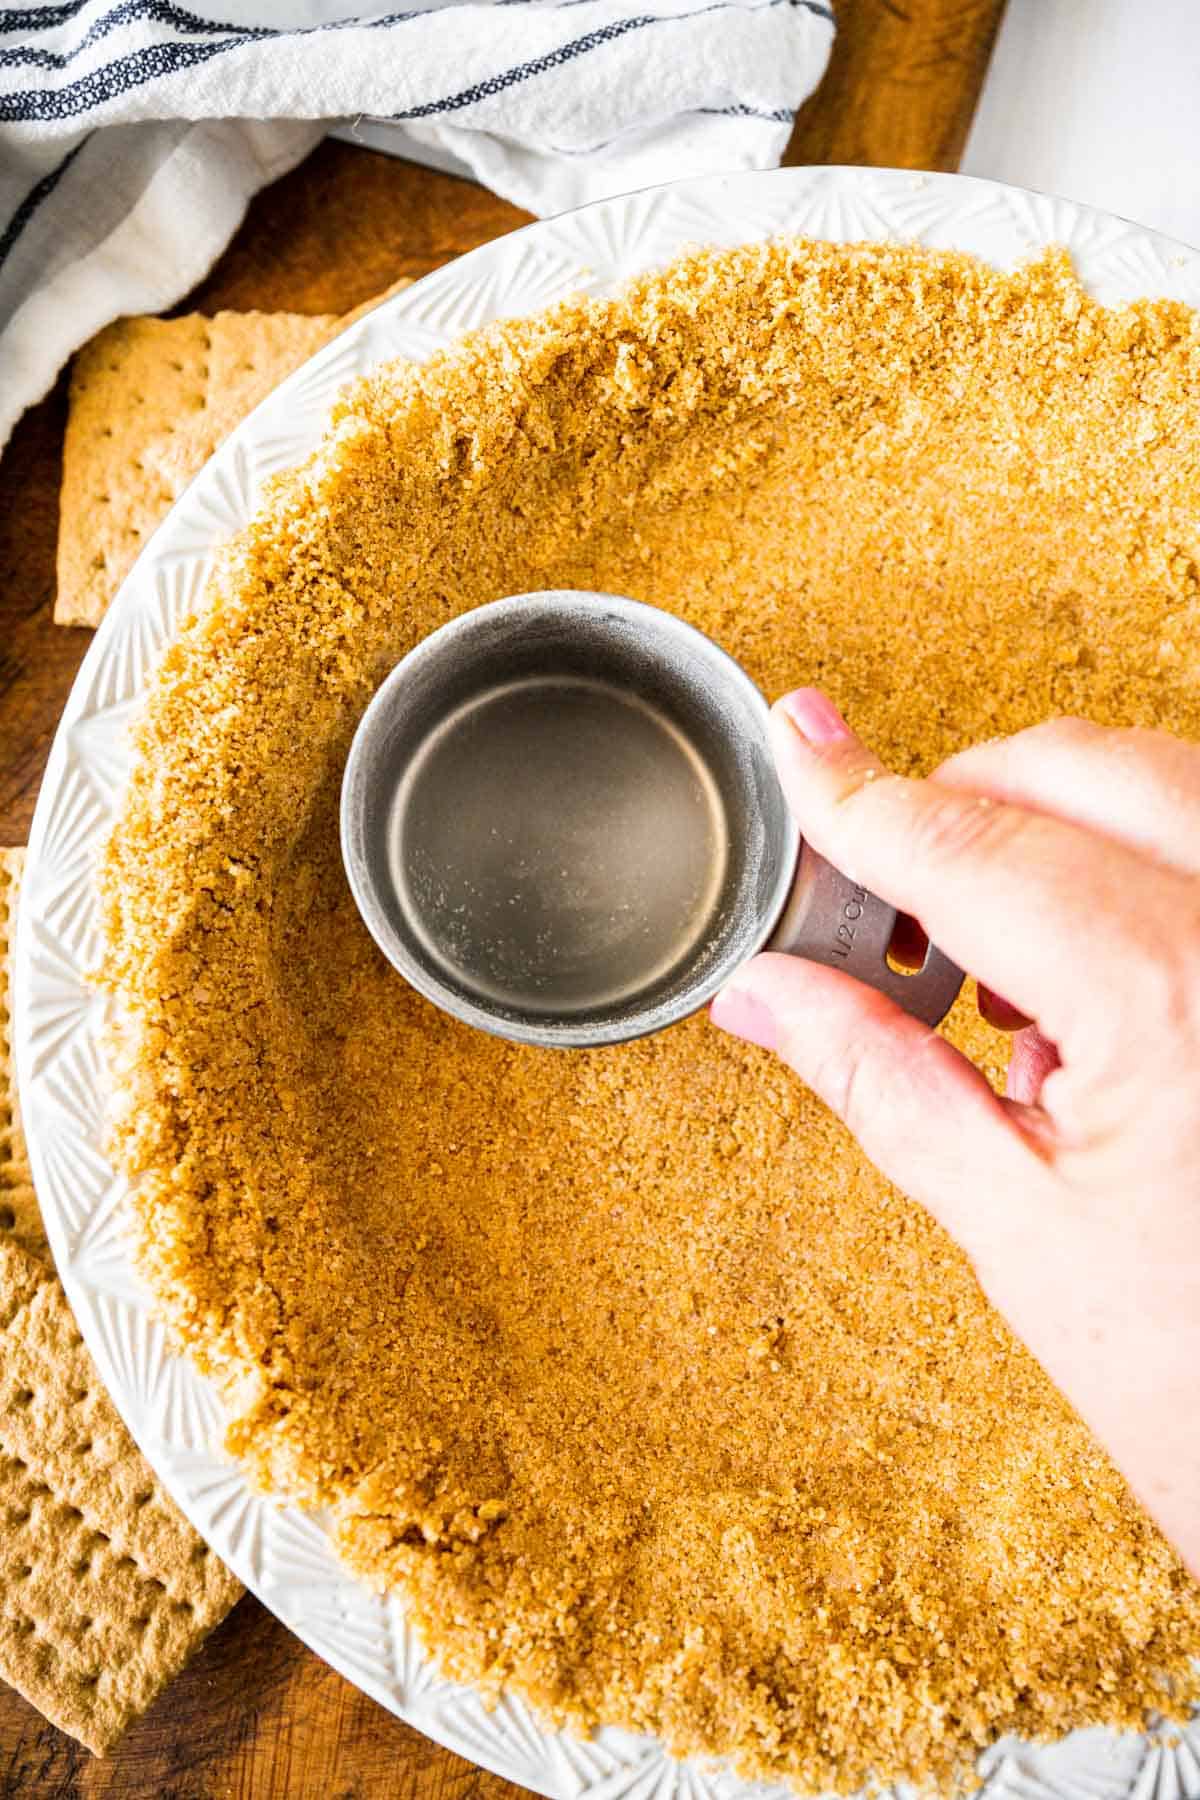 The hand of a person pressing a tin measuring cup into crumbs forming a homemade graham cracker crust in a white pie plate.